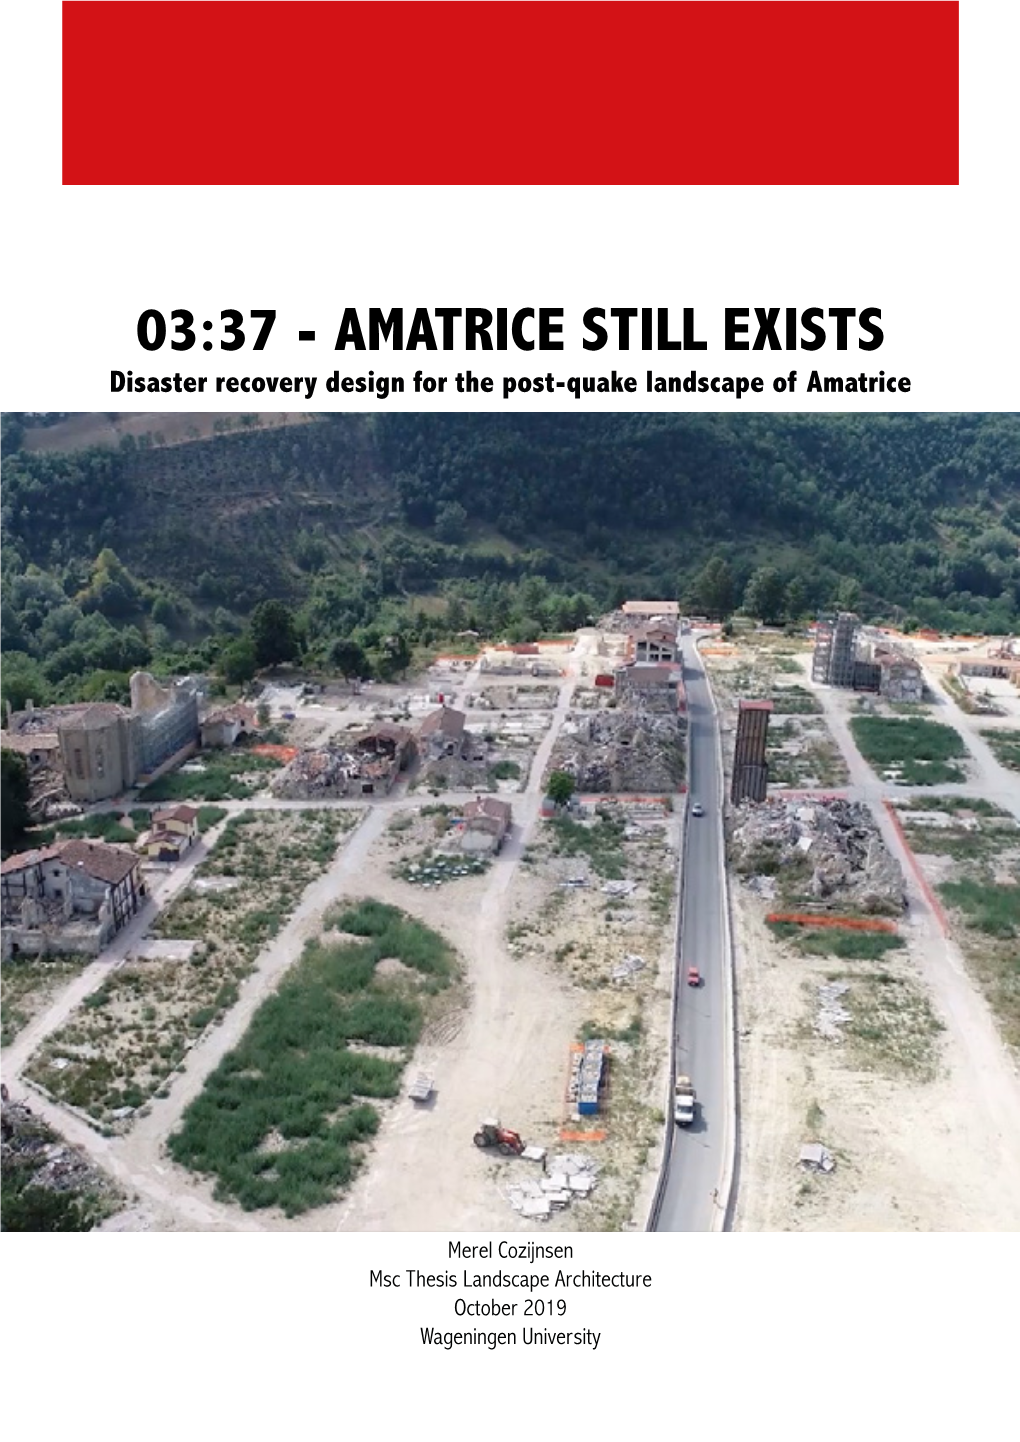 AMATRICE STILL EXISTS Disaster Recovery Design for the Post-Quake Landscape of Amatrice